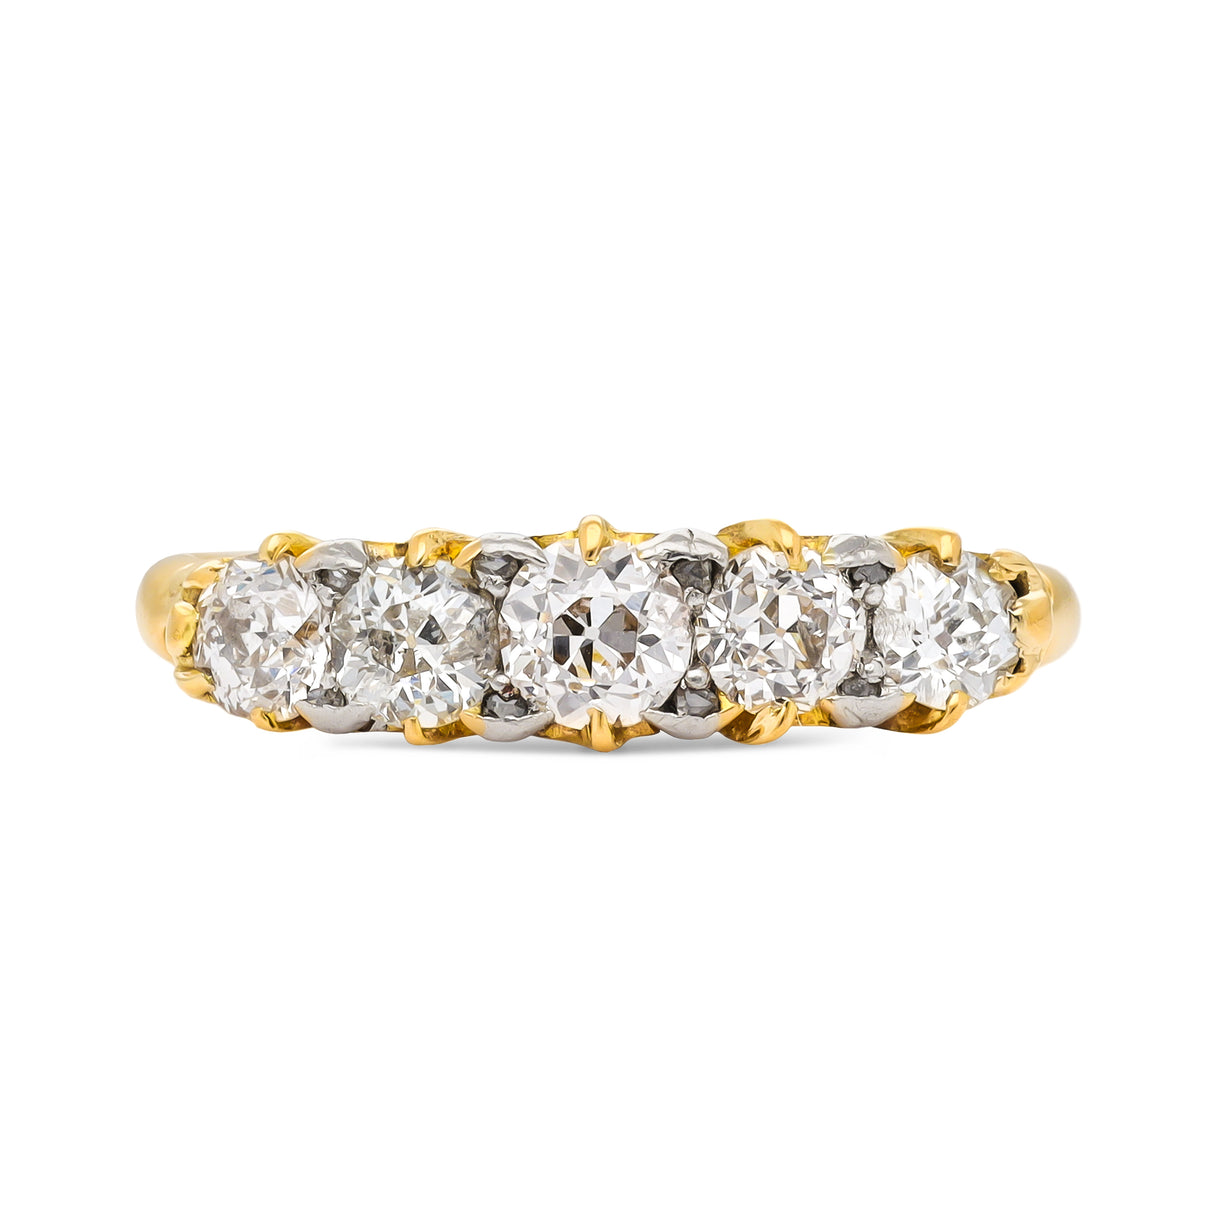 Antique diamond five-stone engagement ring, 18ct yellow gold